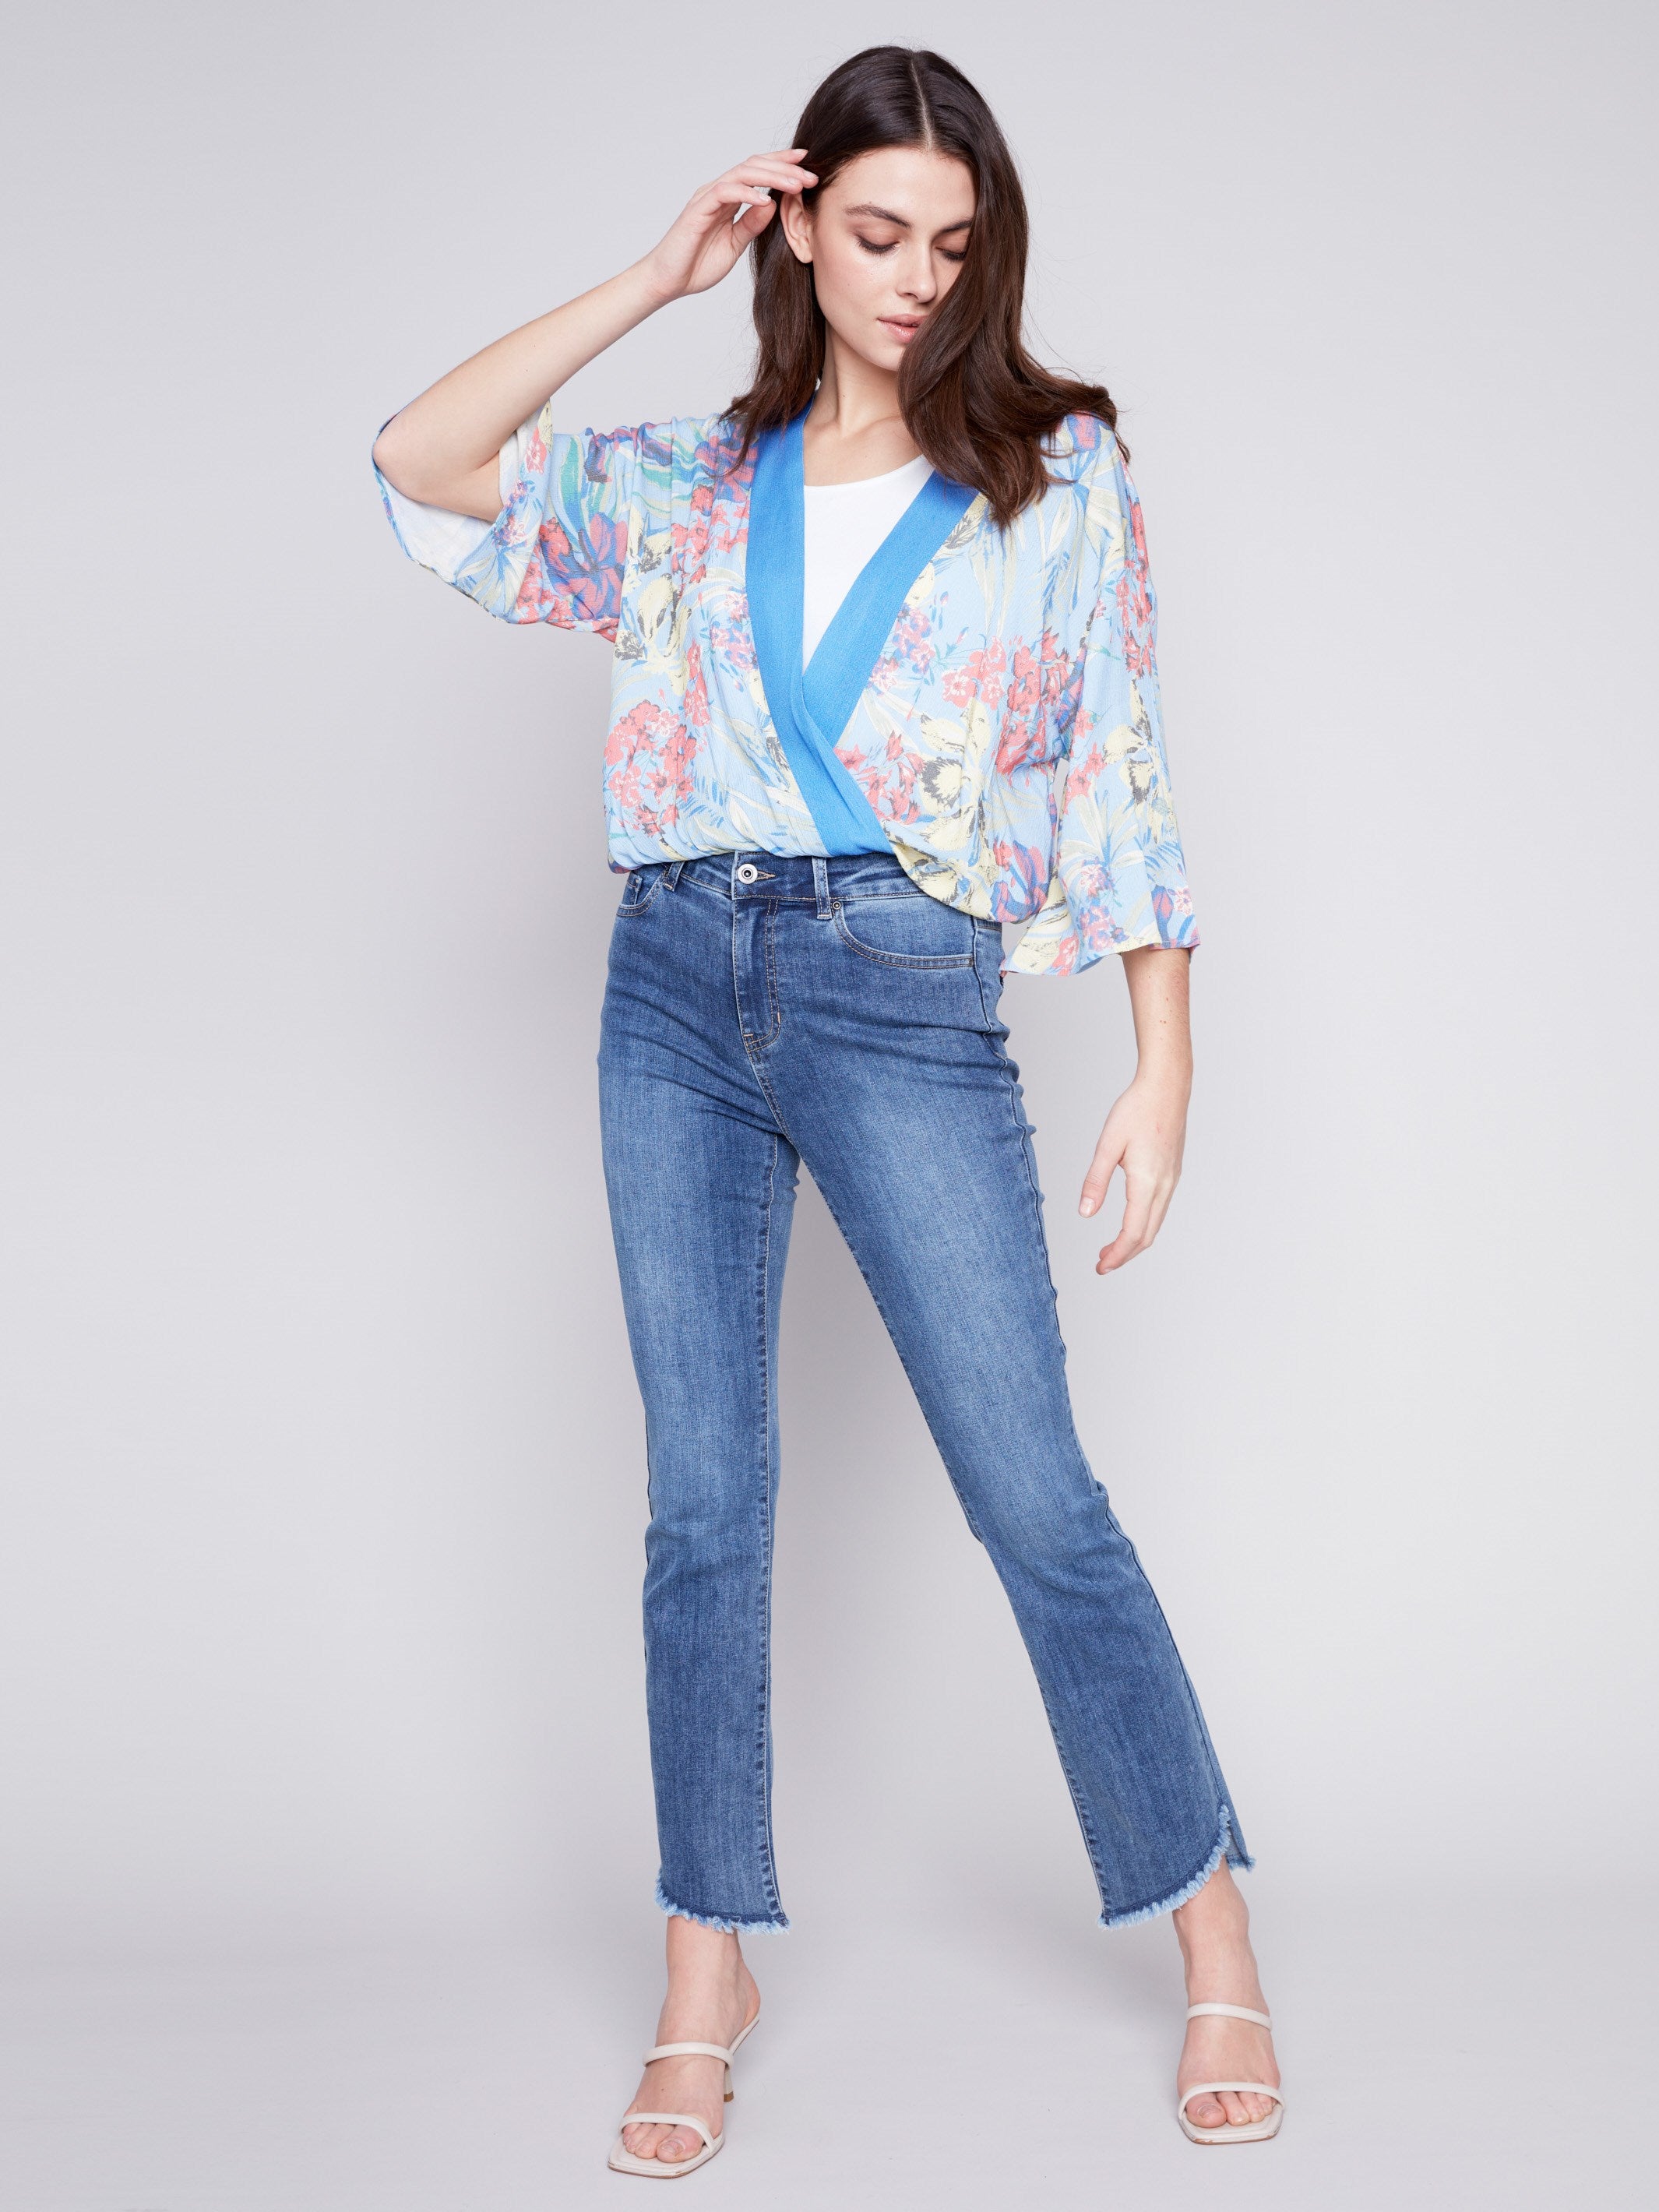 Charlie B Printed Overlap Blouse - Lillypad - Image 2